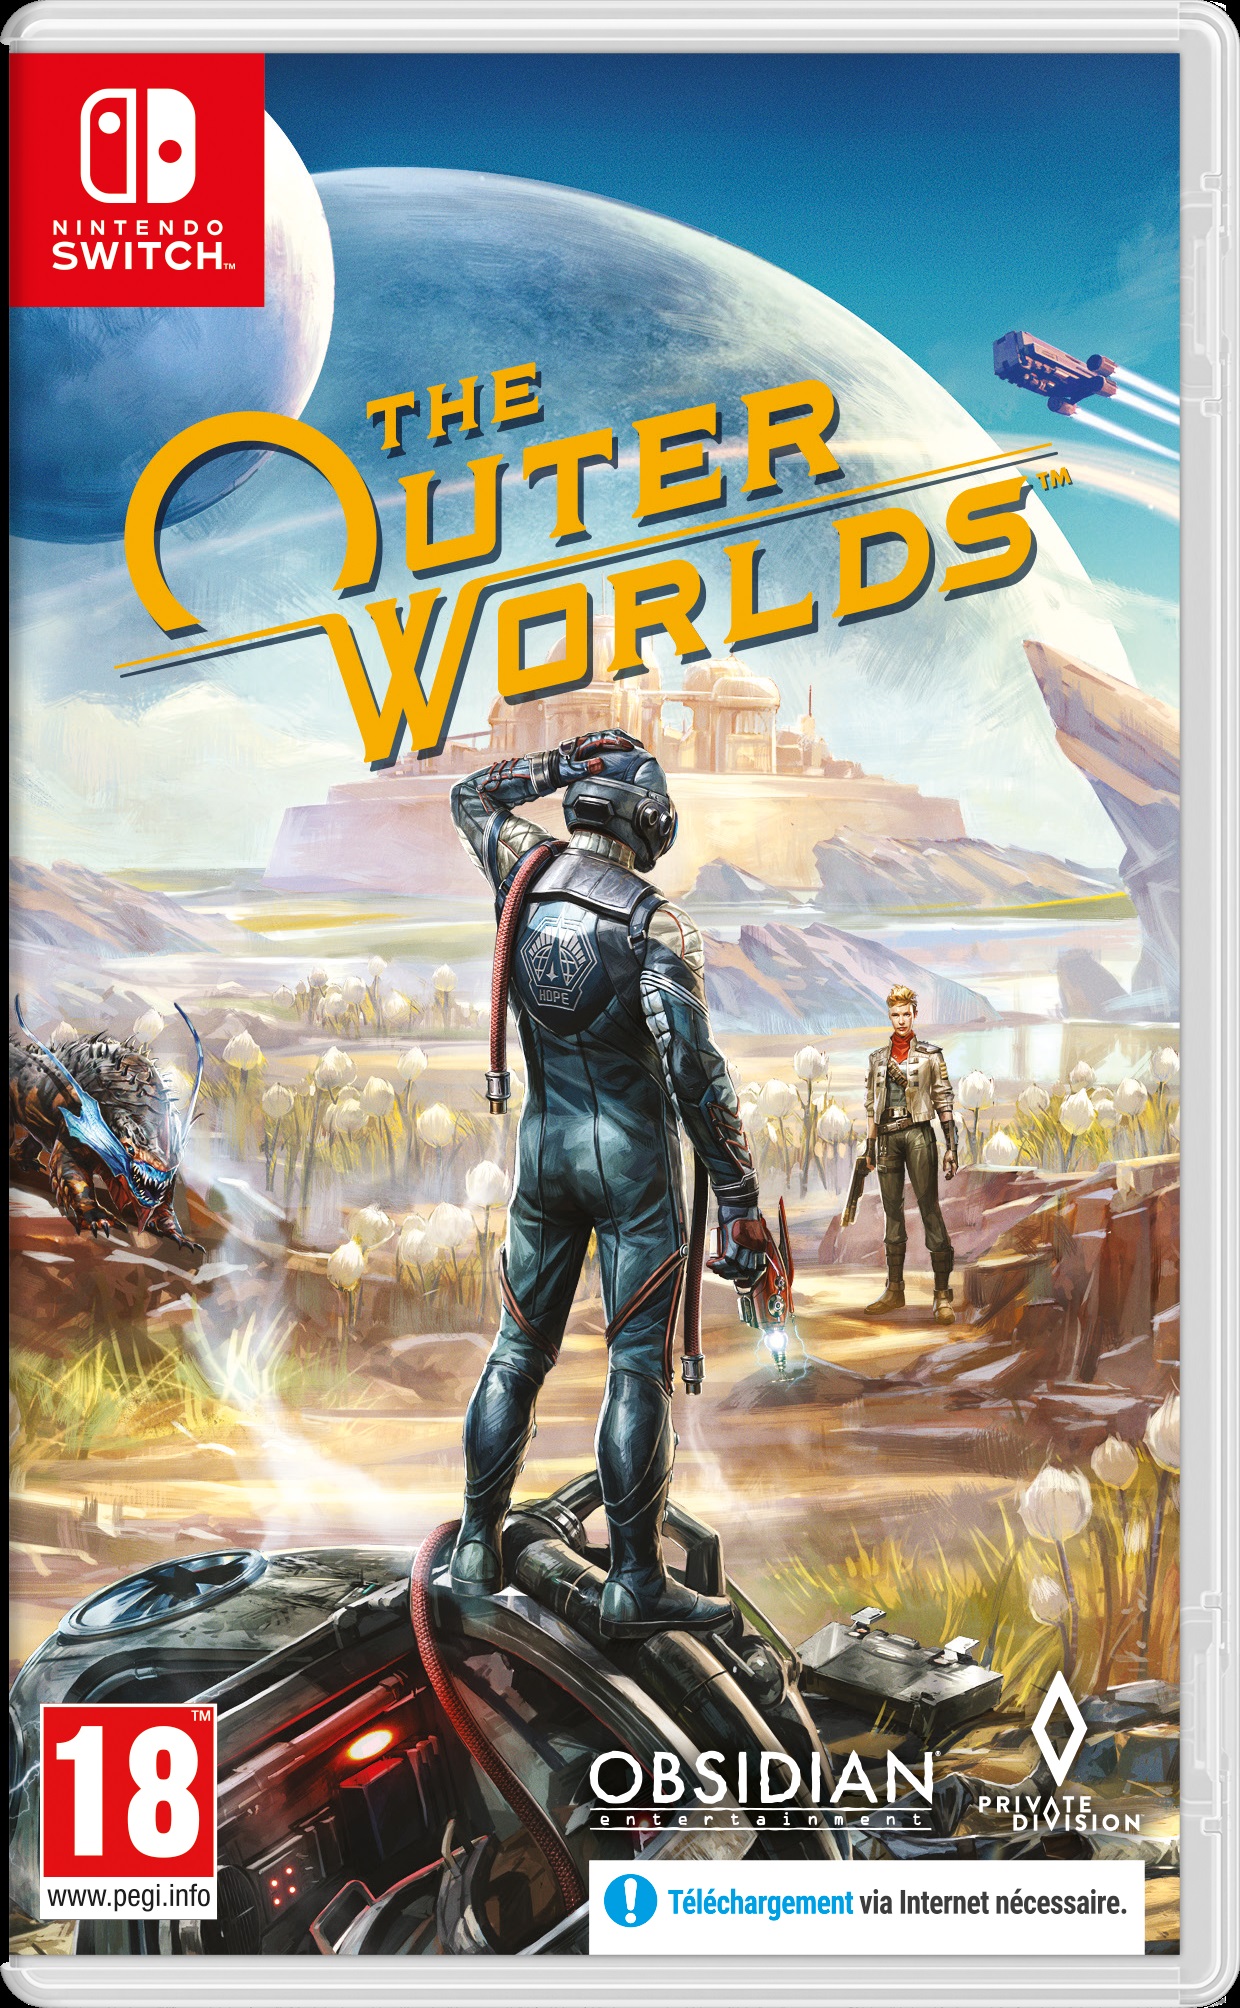 Retrouvez notre TEST : The Outer Worlds - Nintendo Switch